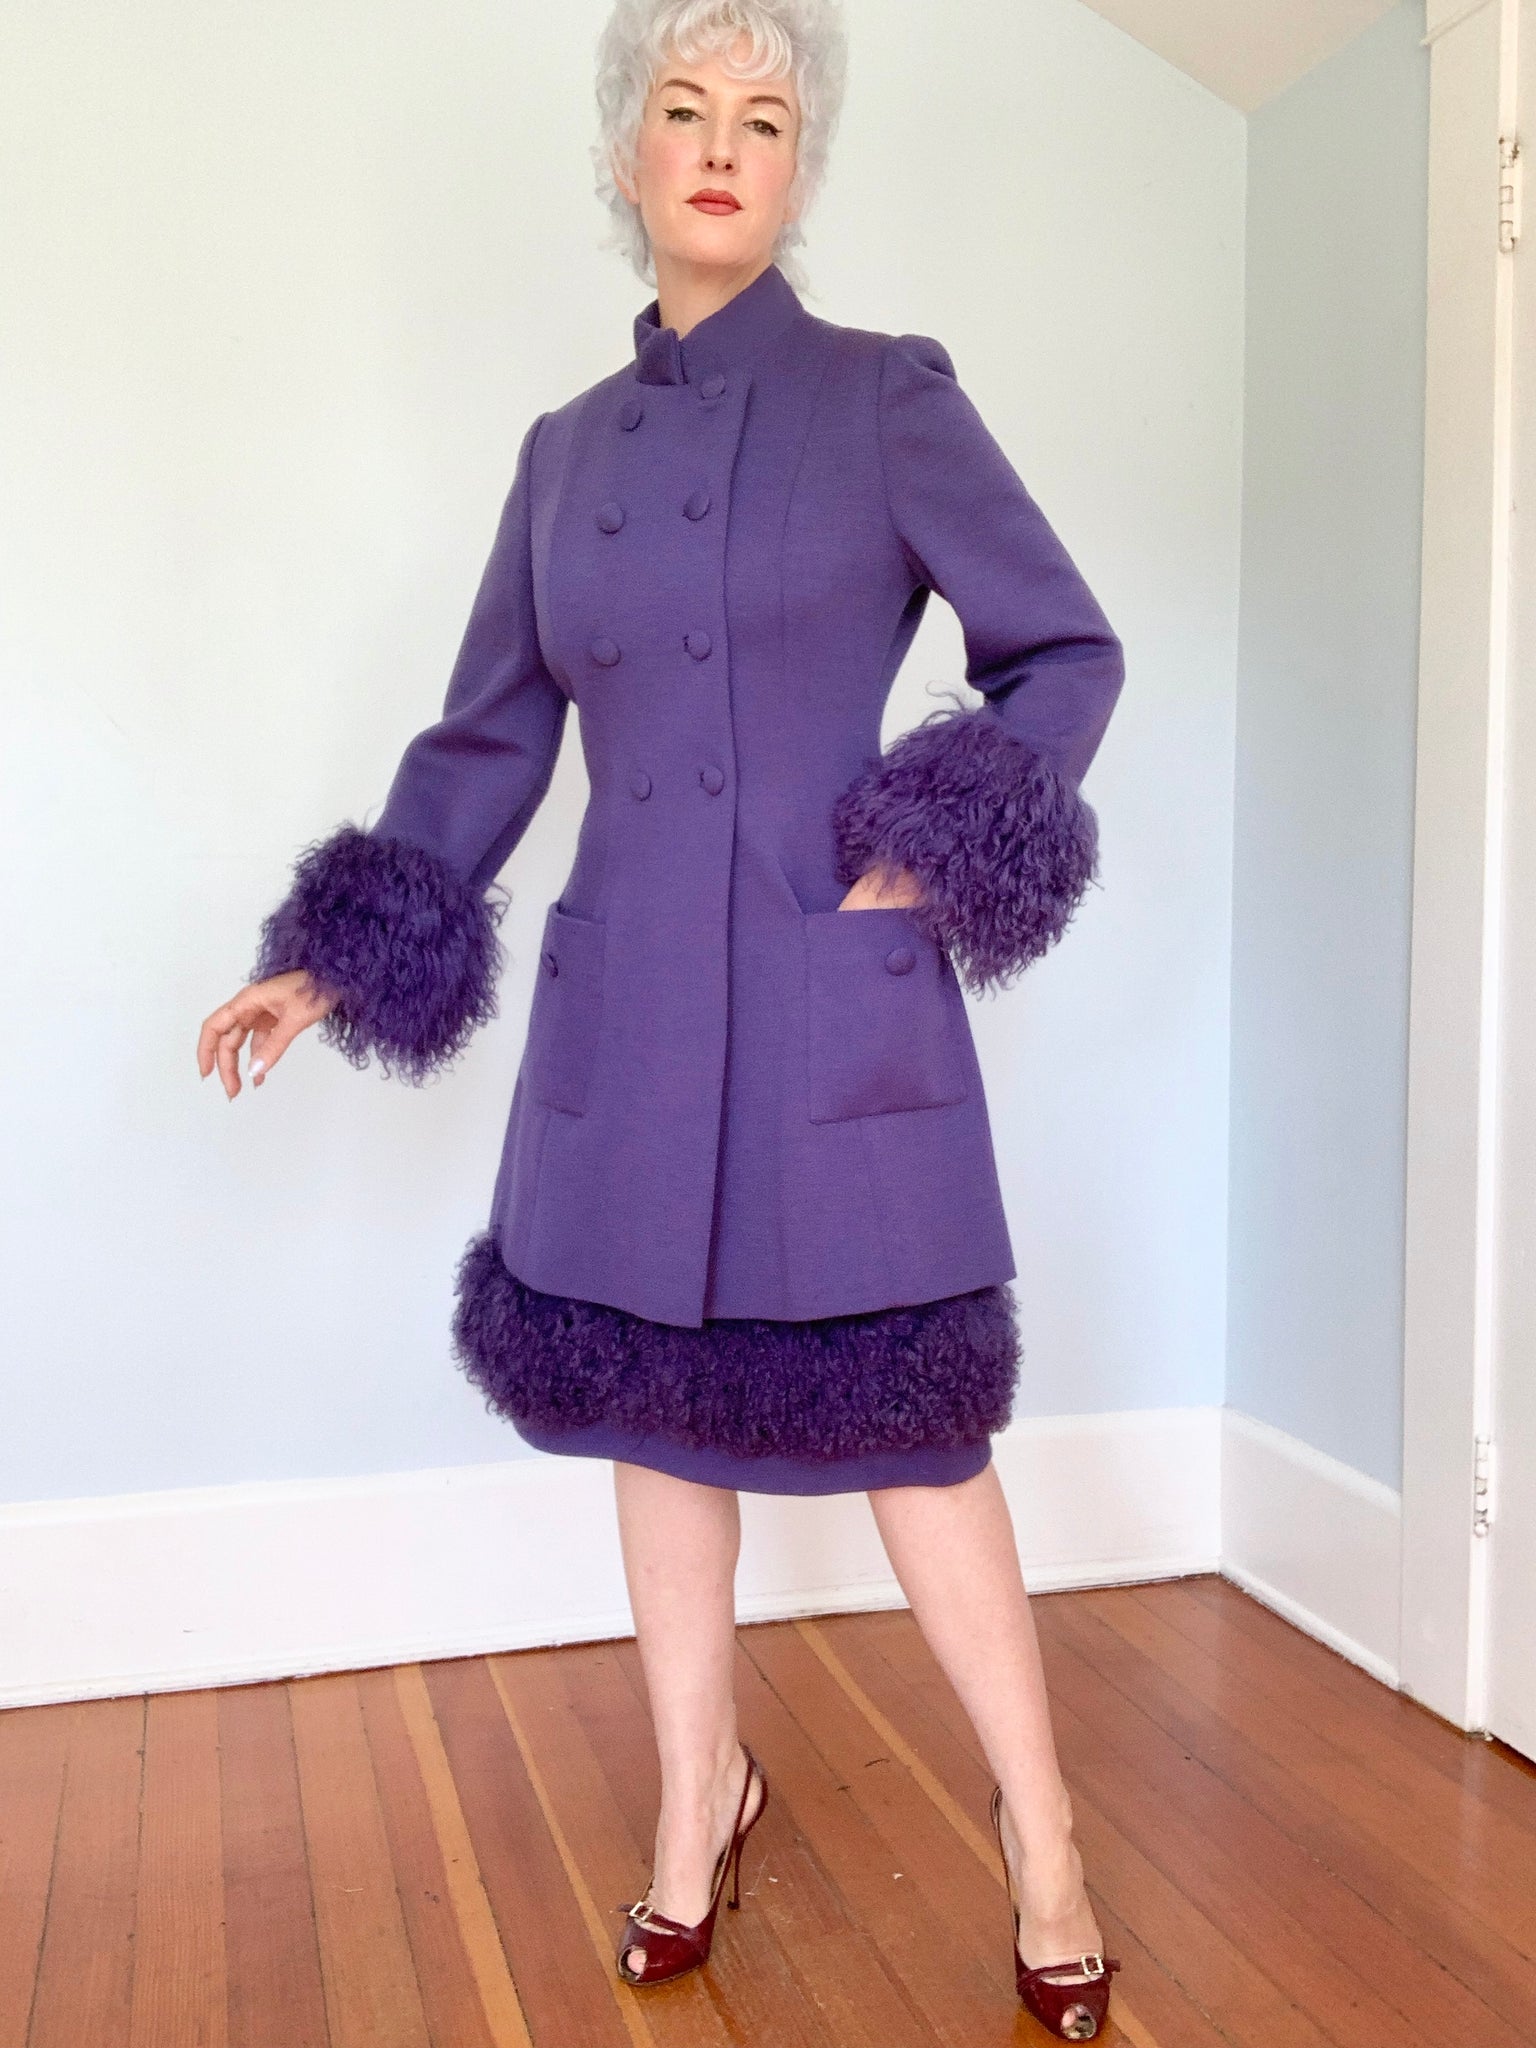 Mama Loves You, 1960s purple velvet swing coat. Was $145 and now on sale  for $108.75. Fits large/XL (bust 51”, waist/hips free, length 41”). (SOLD)